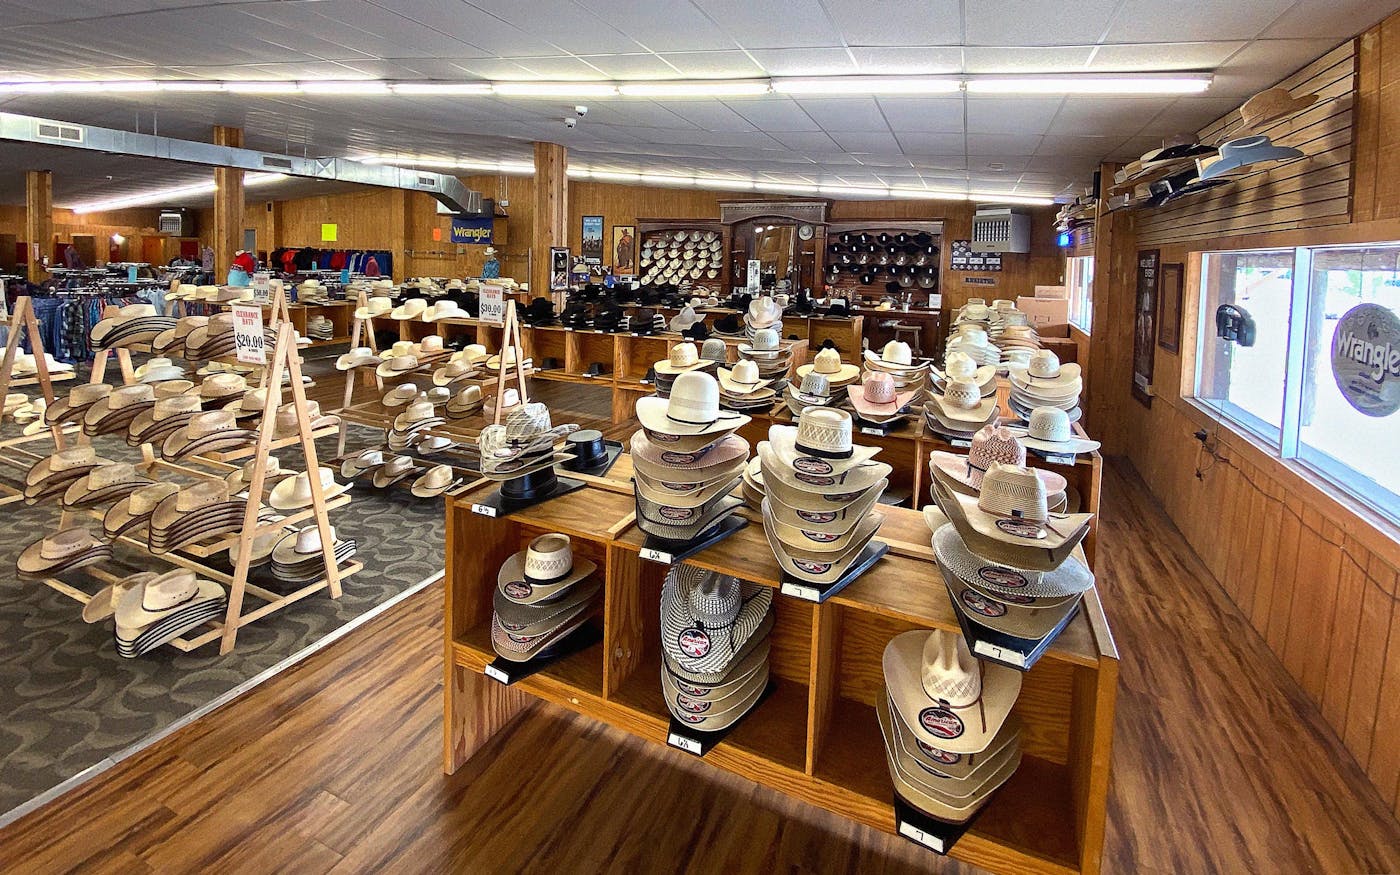 Is This the Largest Western Wear Shop in the World? An Investigation – Texas  Monthly